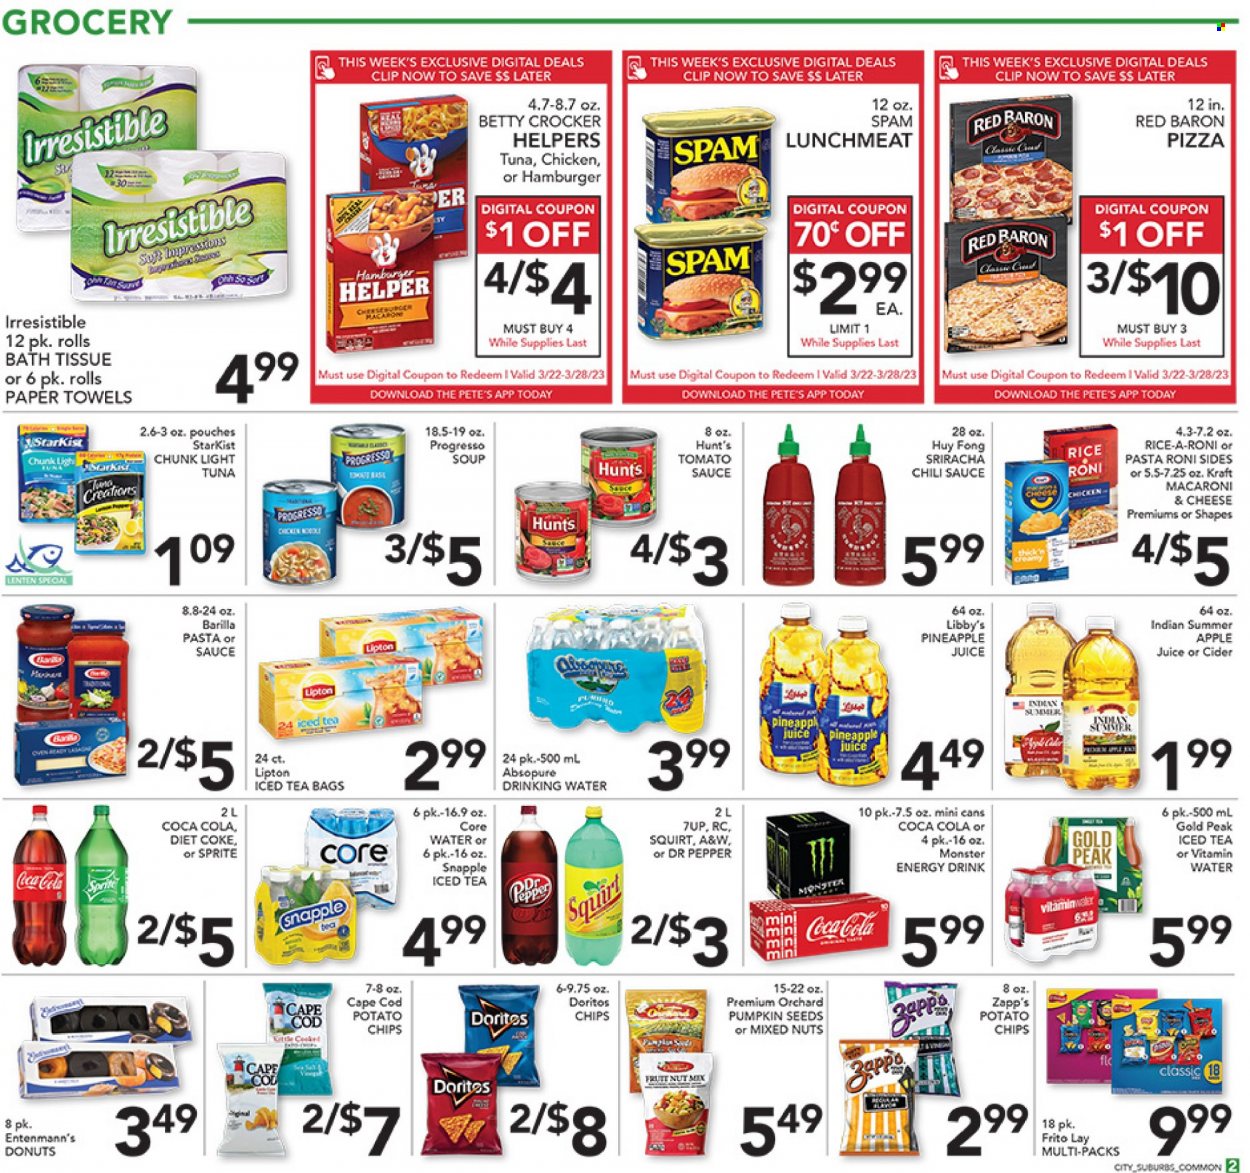 thumbnail - Pete's Fresh Market Flyer - 03/22/2023 - 03/28/2023 - Sales products - donut, macaroons, Entenmann's, pineapple, cod, StarKist, macaroni & cheese, cheeseburger, Barilla, noodles, Progresso, Kraft®, Spam, lunch meat, Red Baron, Doritos, potato chips, chips, tomato sauce, light tuna, rice, sriracha, chilli sauce, mixed nuts, pumpkin seeds, apple juice, Coca-Cola, Sprite, pineapple juice, juice, energy drink, Monster, Lipton, Dr. Pepper, Diet Coke, 7UP, Monster Energy, Snapple, A&W, Coke, vitamin water, water, tea bags, cider. Page 2.